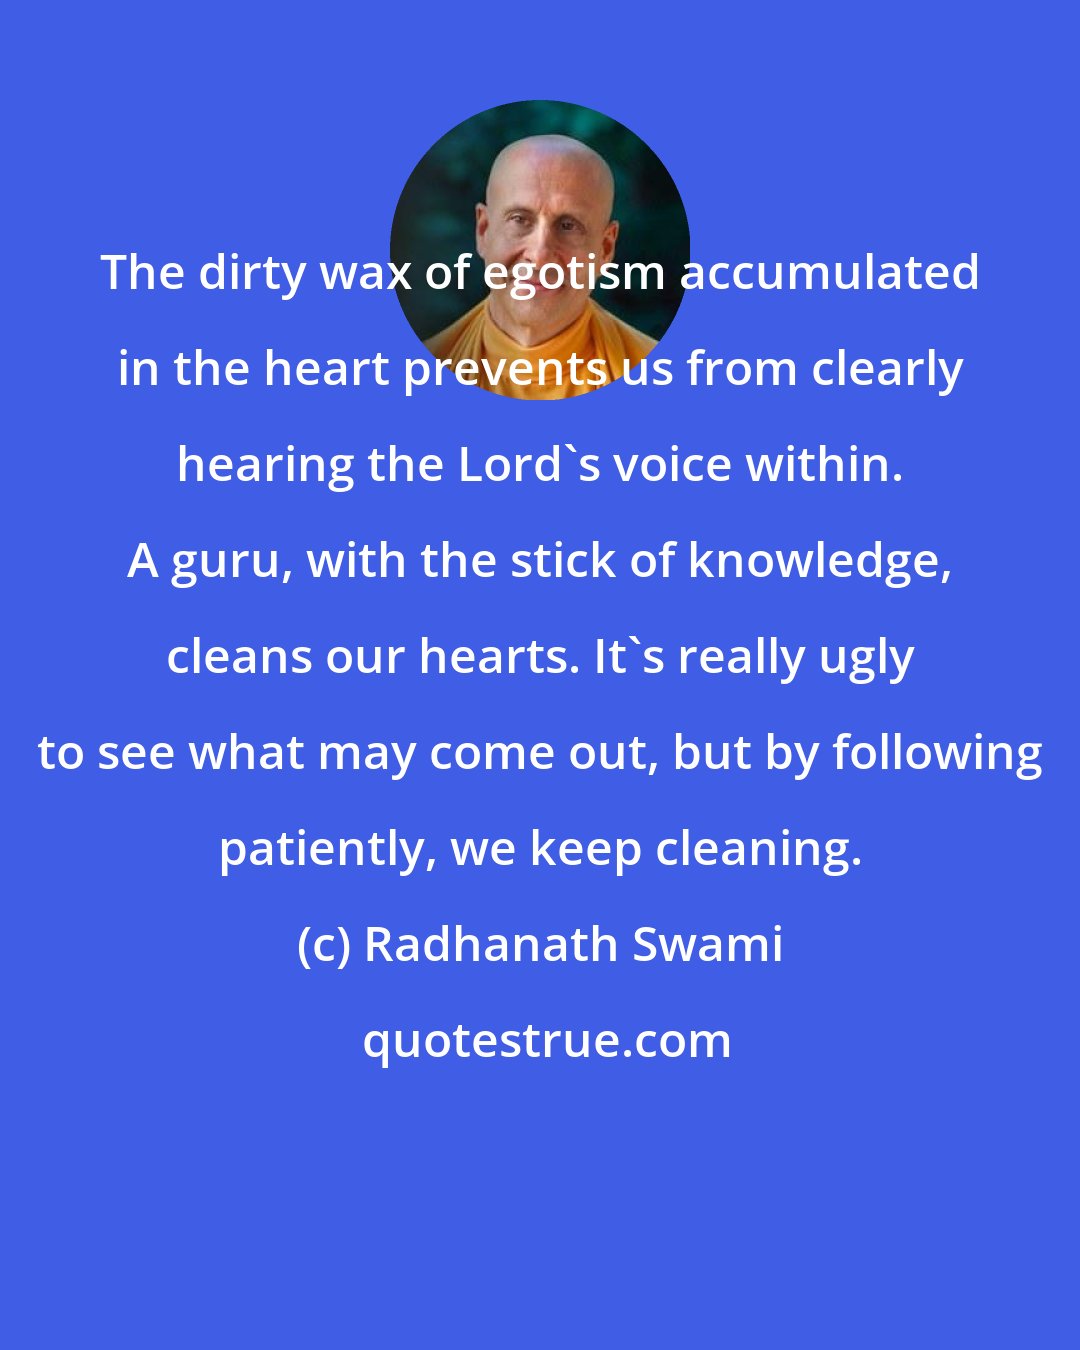 Radhanath Swami: The dirty wax of egotism accumulated in the heart prevents us from clearly hearing the Lord's voice within. A guru, with the stick of knowledge, cleans our hearts. It's really ugly to see what may come out, but by following patiently, we keep cleaning.